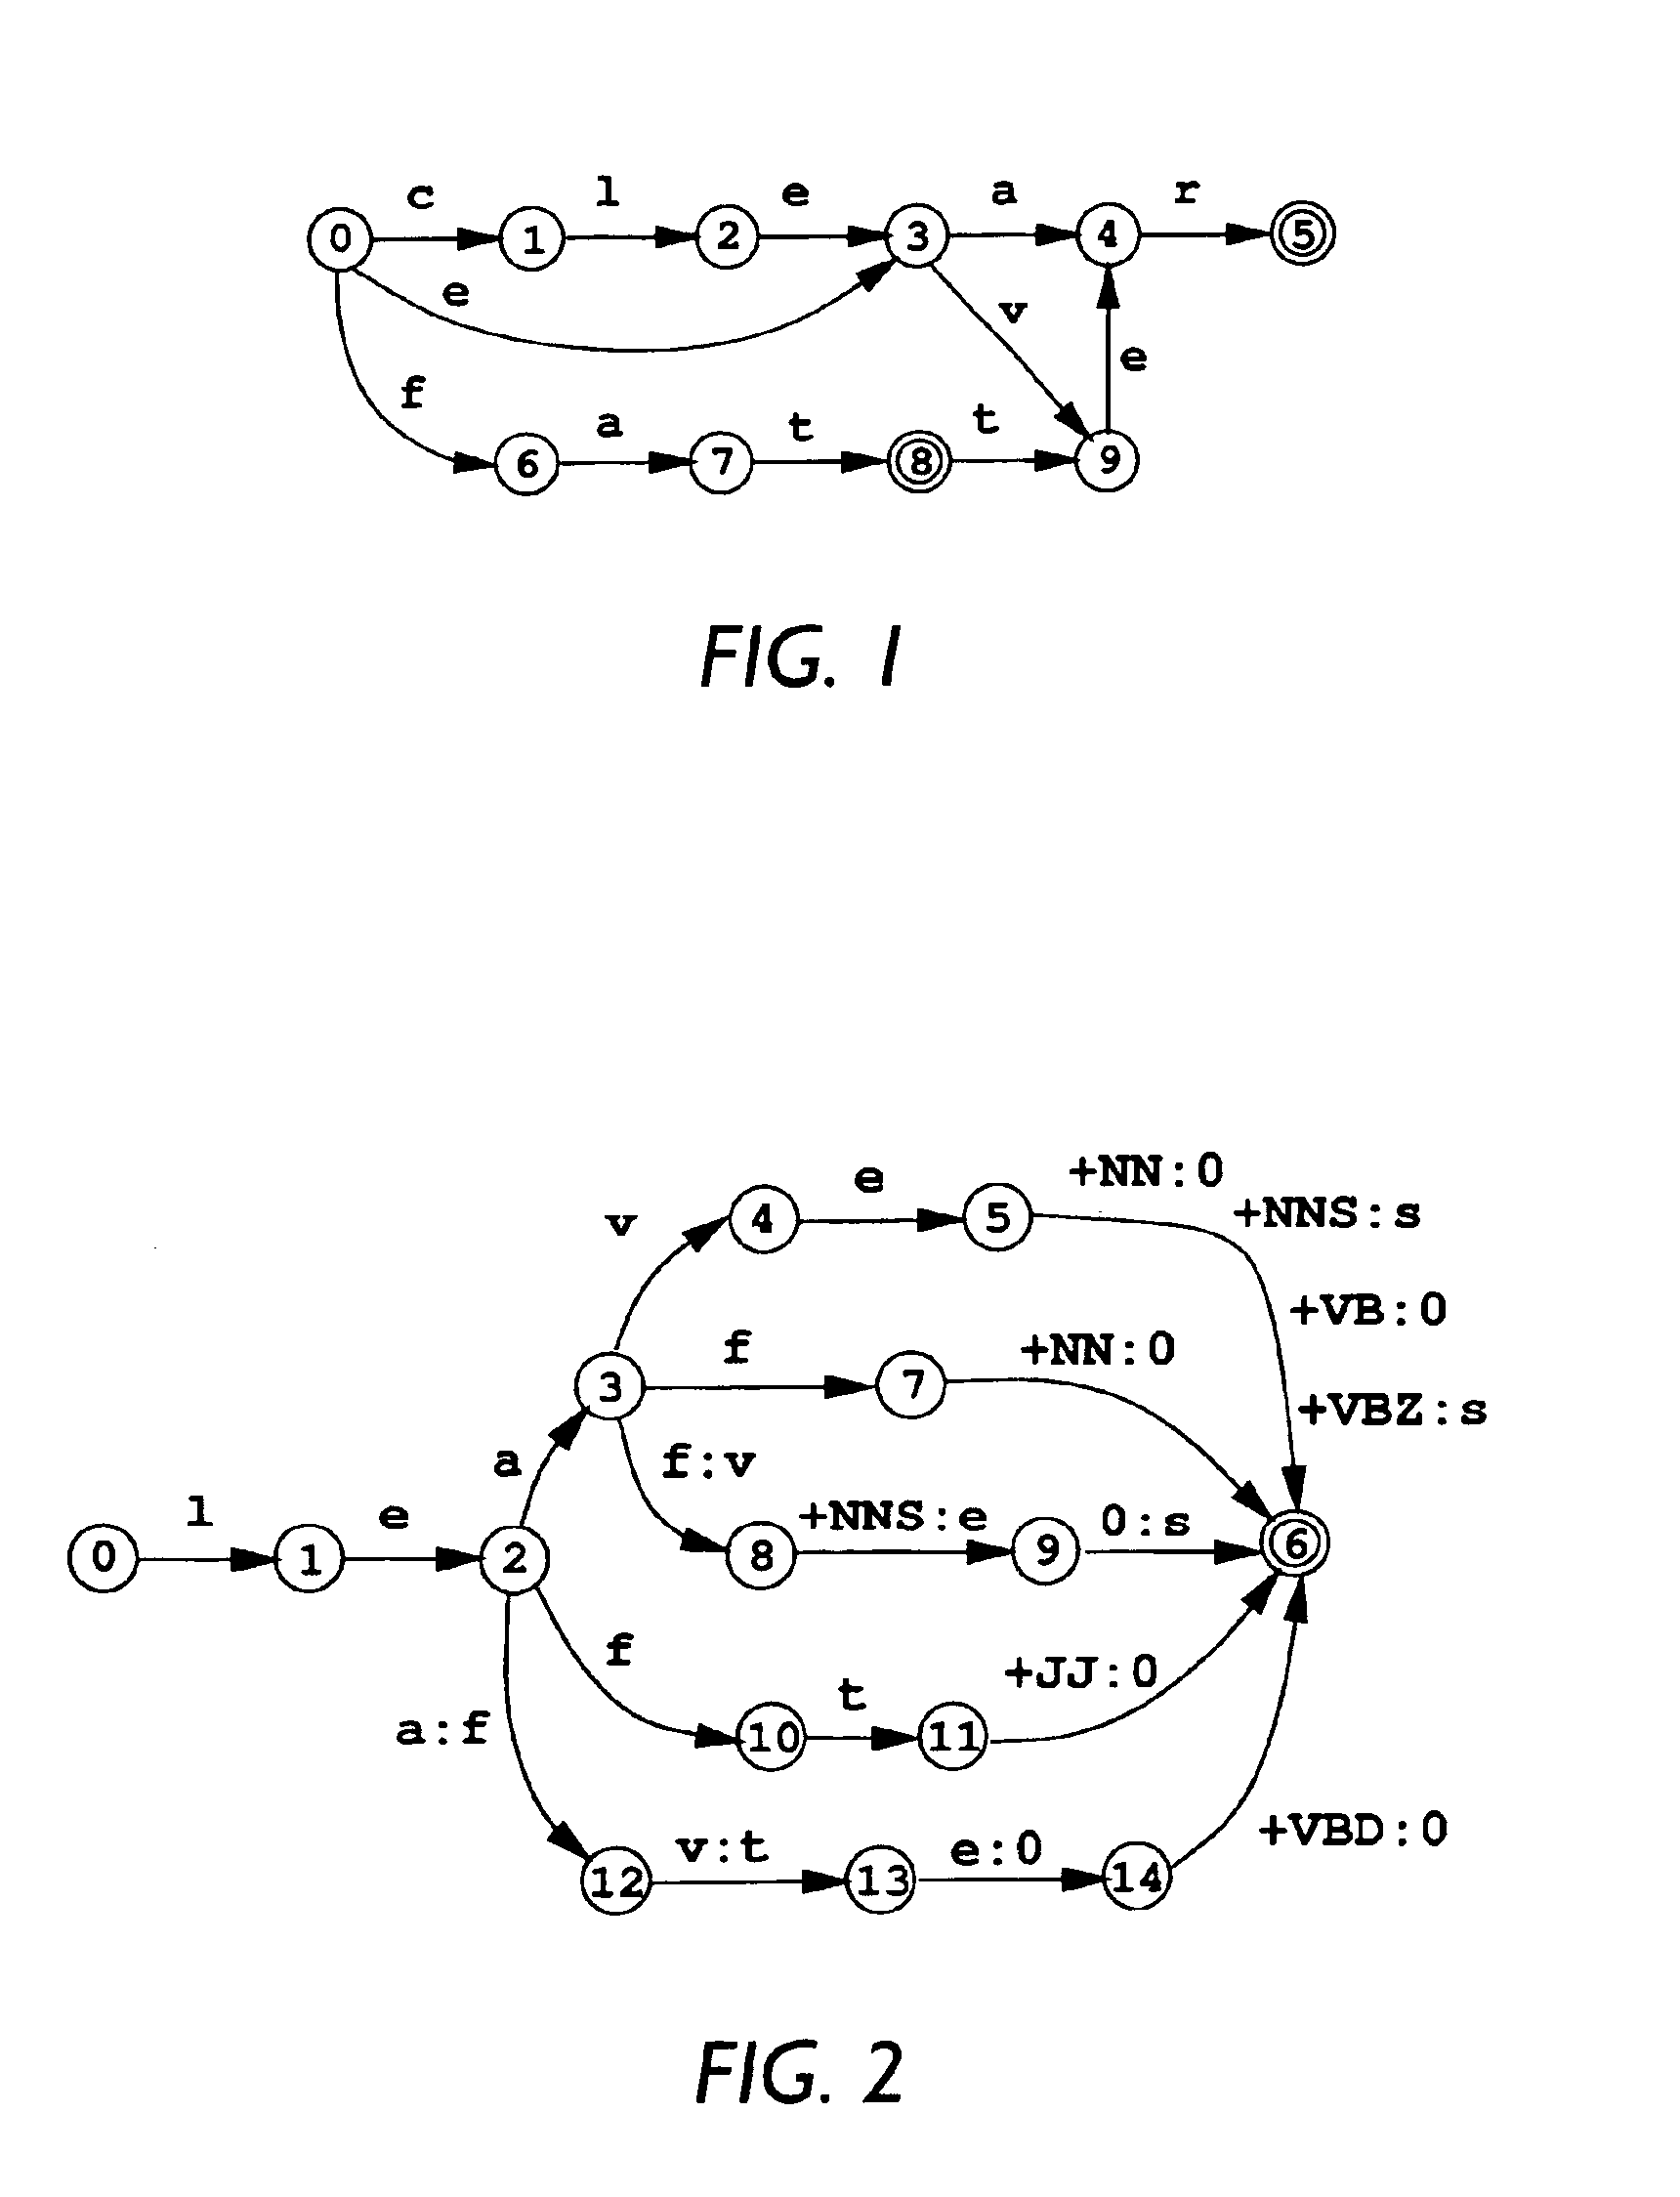 Method and apparatus for extracting infinite ambiguity when factoring finite state transducers